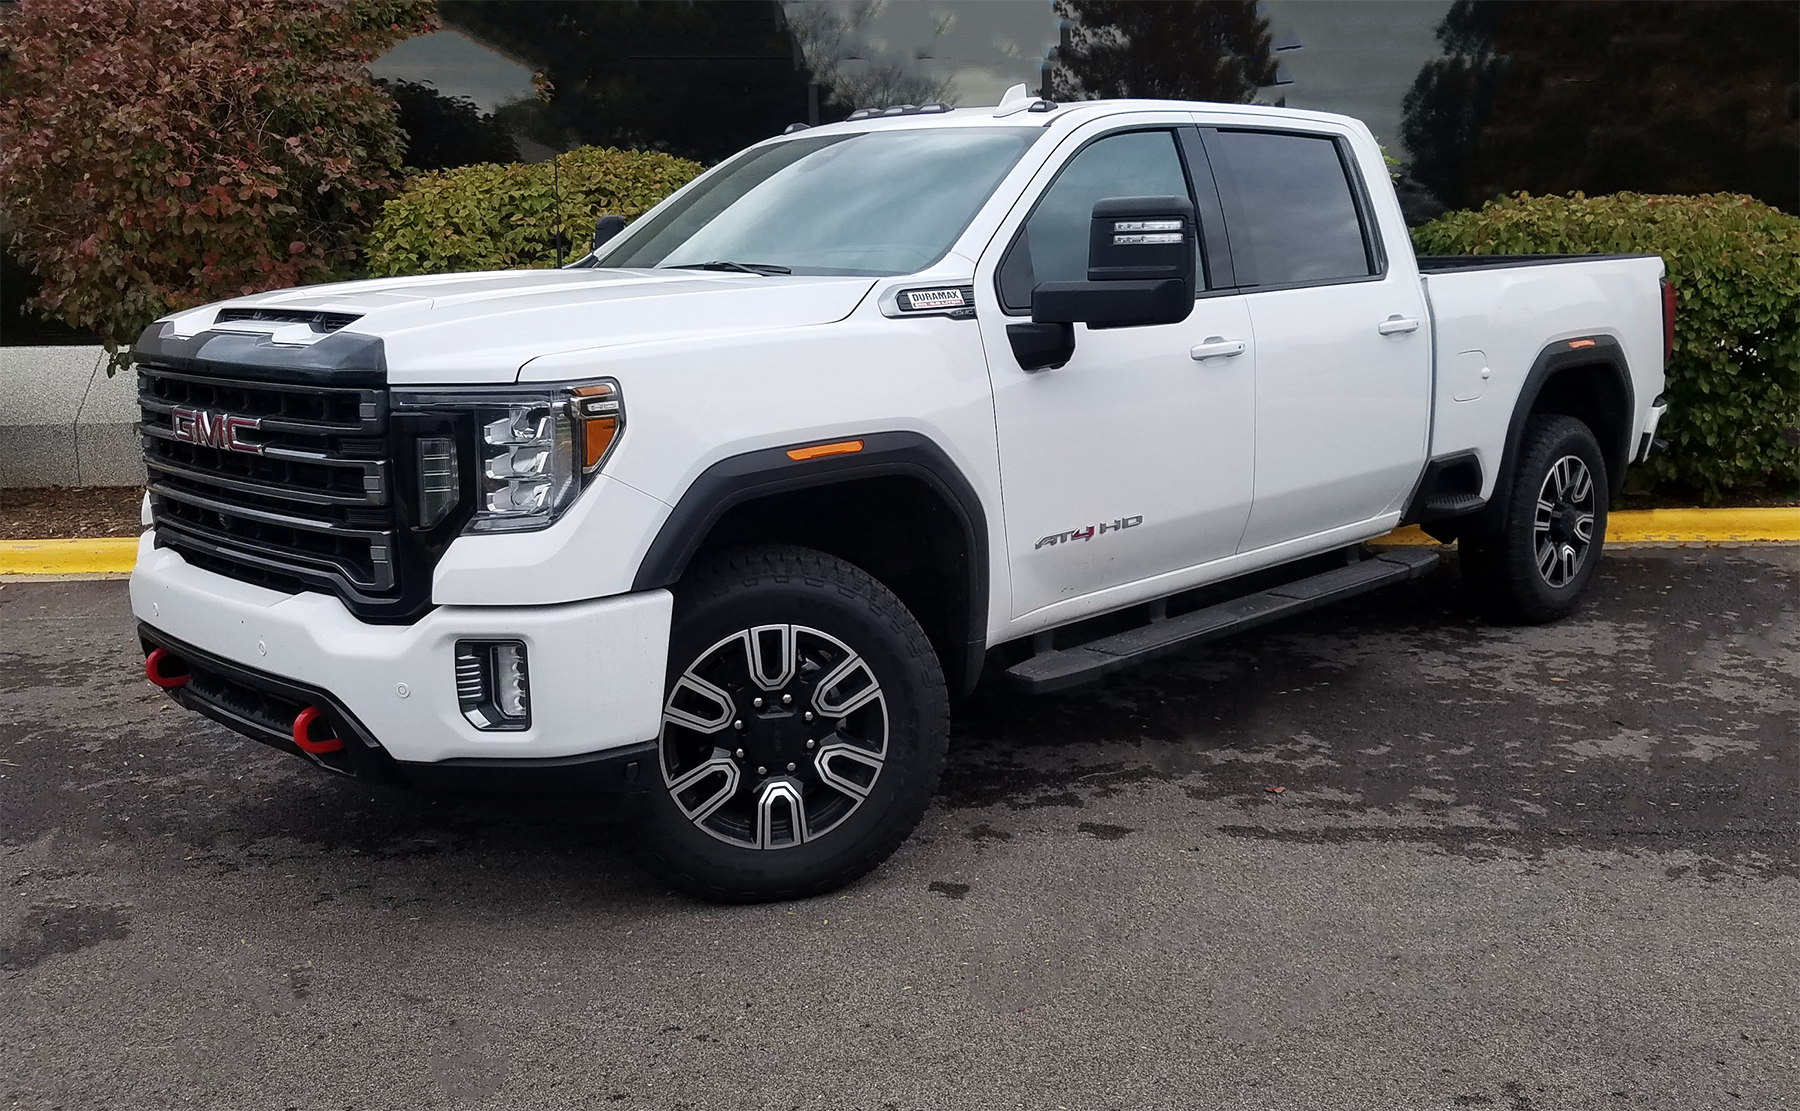 Quick Spin 2020 Gmc Sierra 2500 At4 The Daily Drive Consumer Guide The Daily Drive Consumer Guide